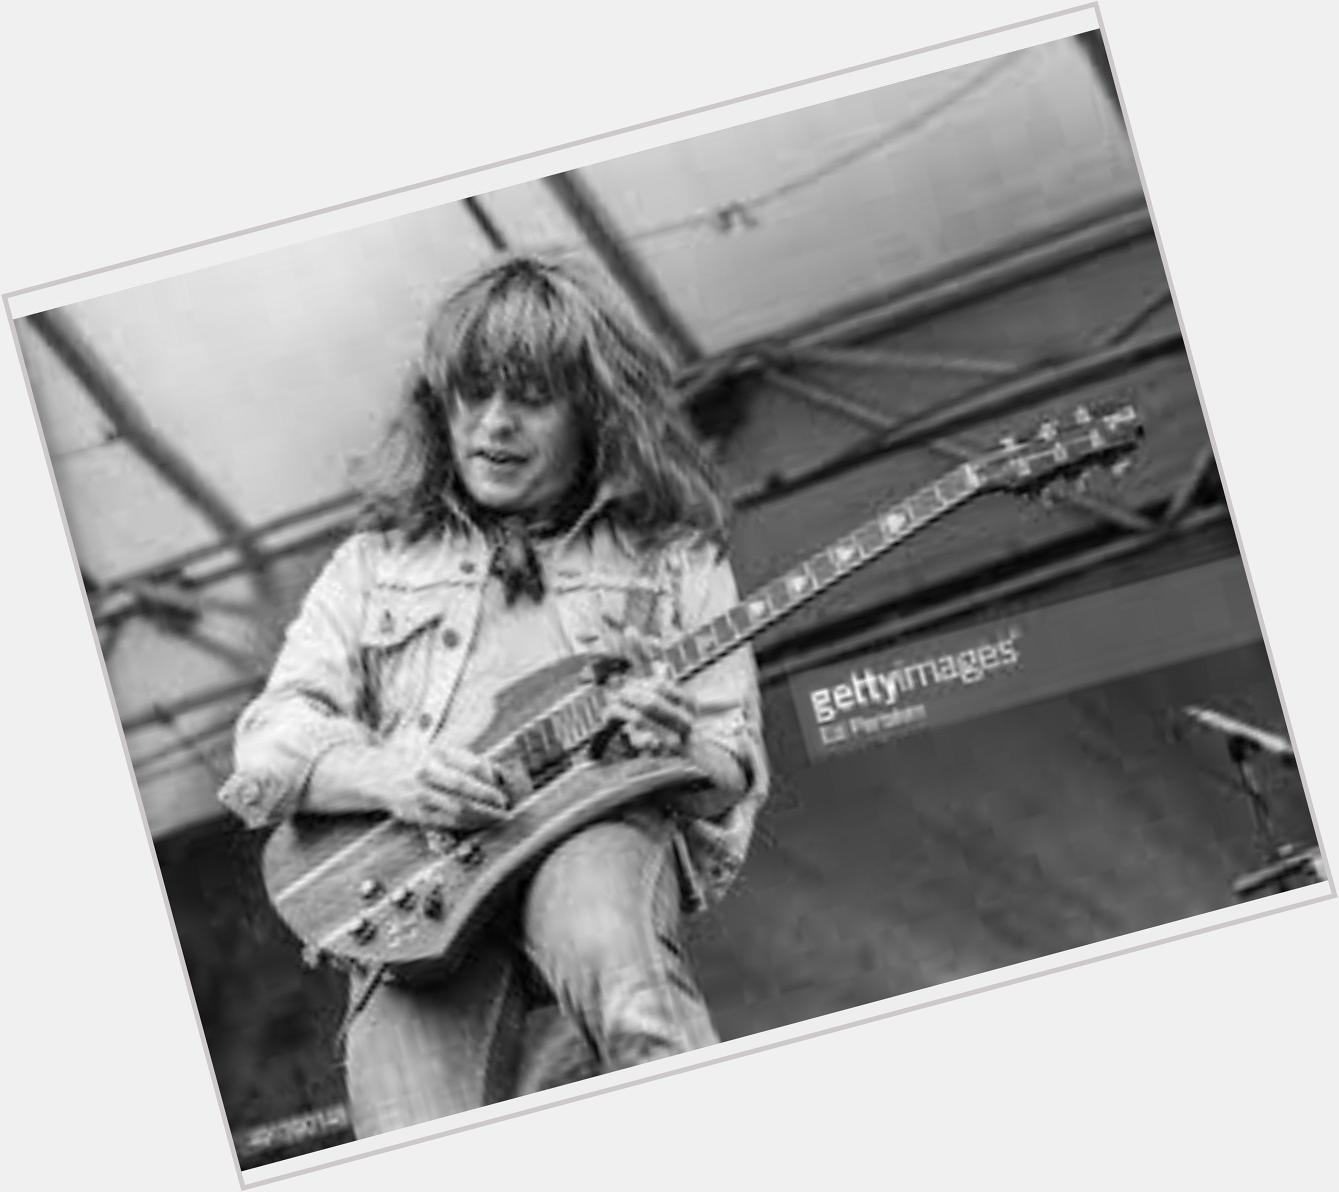 And a very Happy Birthday to the great Rick Derringer!!! 